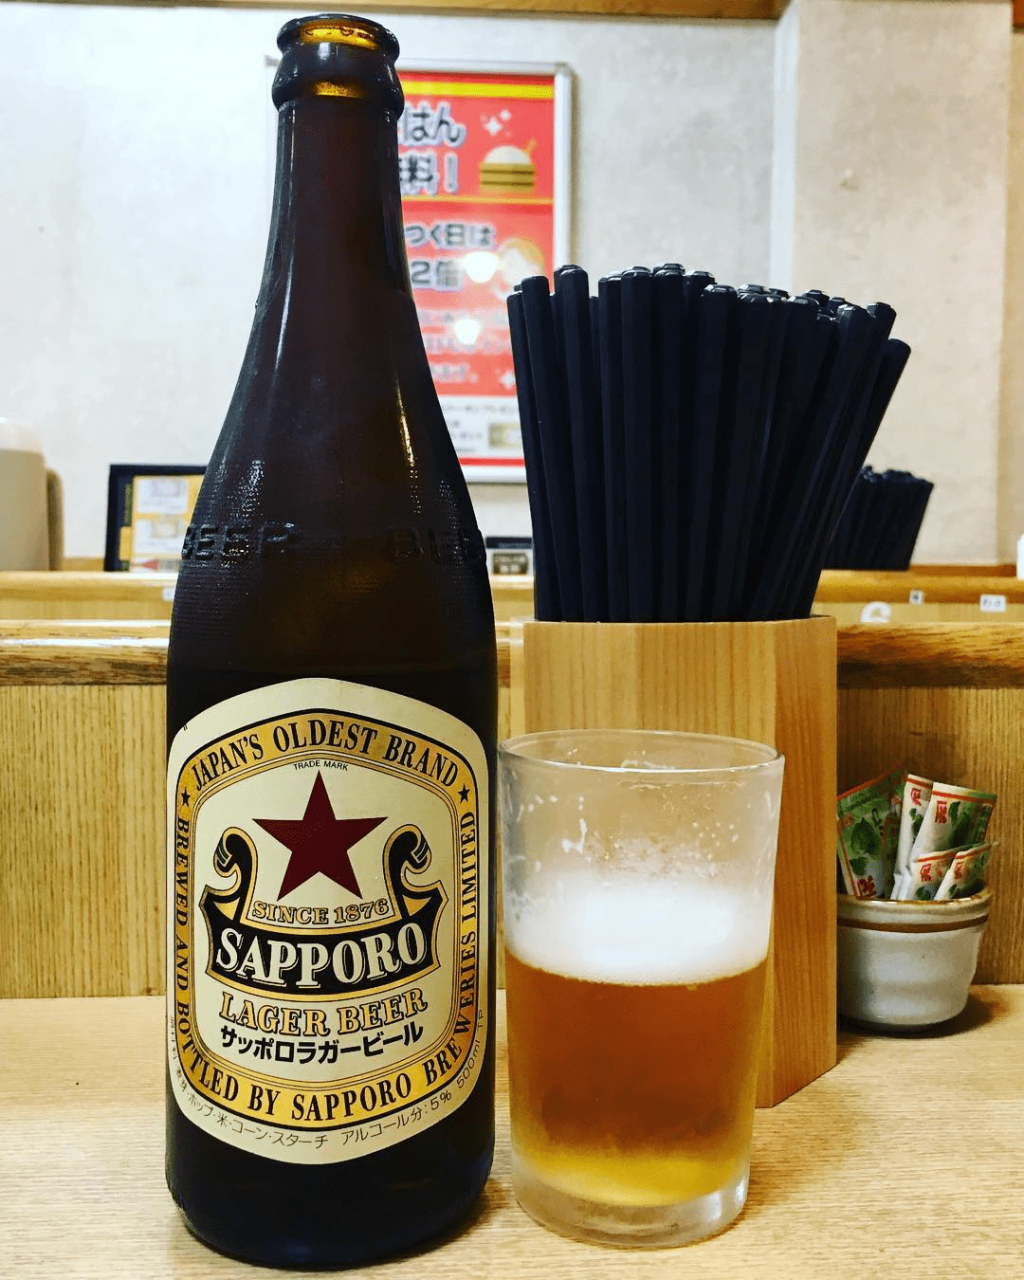 sapporo beer